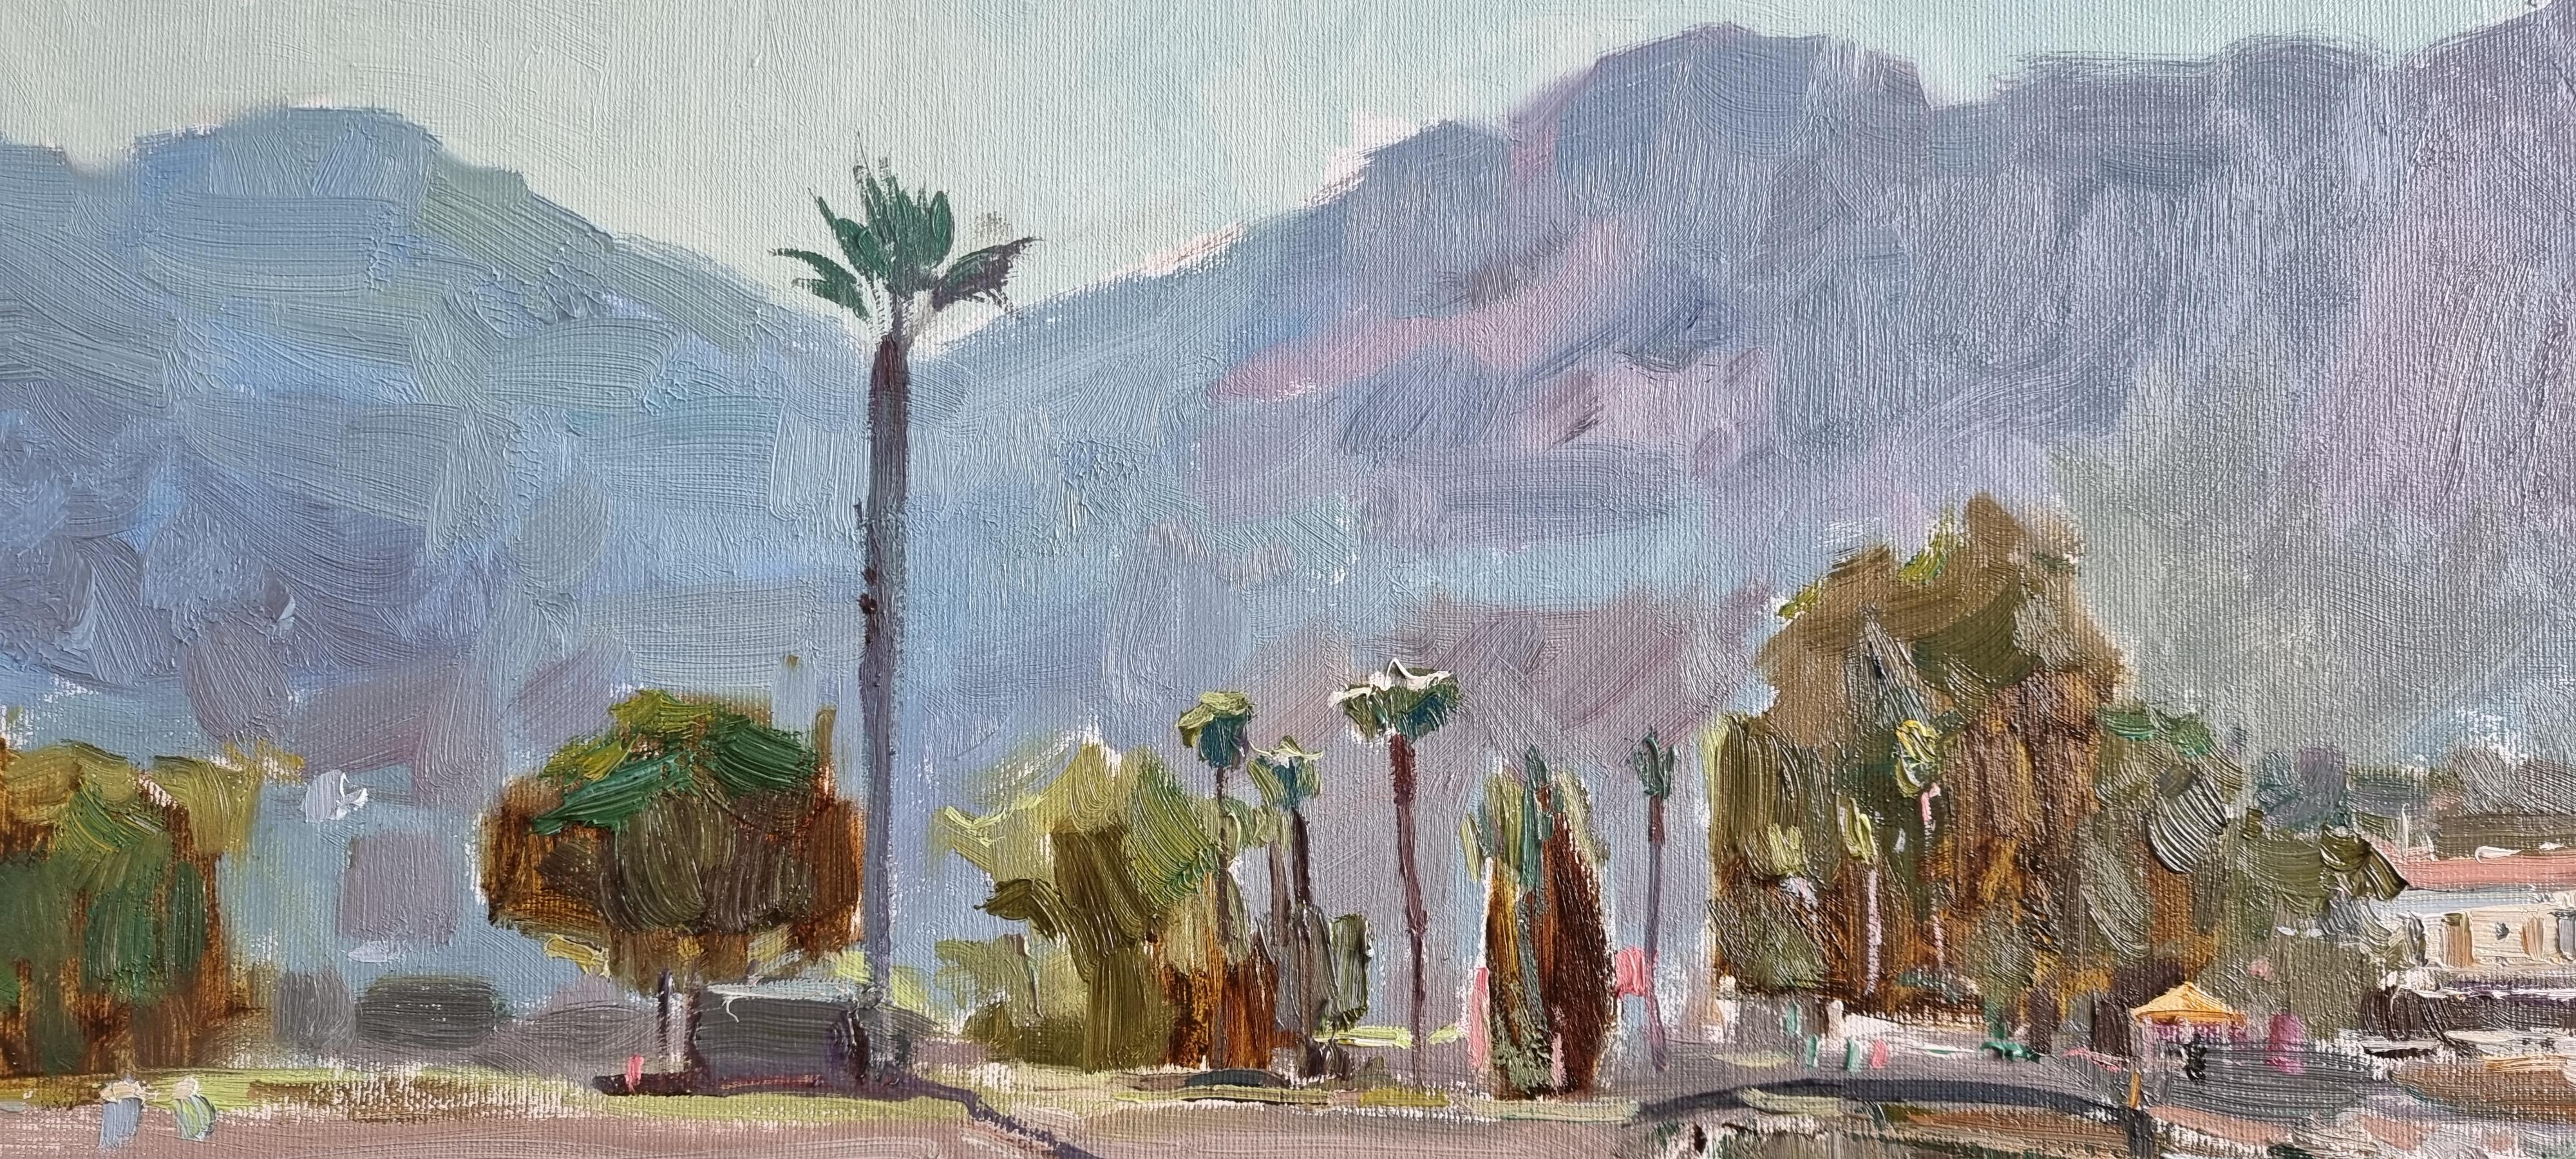 Sunny Bay - Landscape Painting Colors Blue Green White Brown Grey Pastel 6